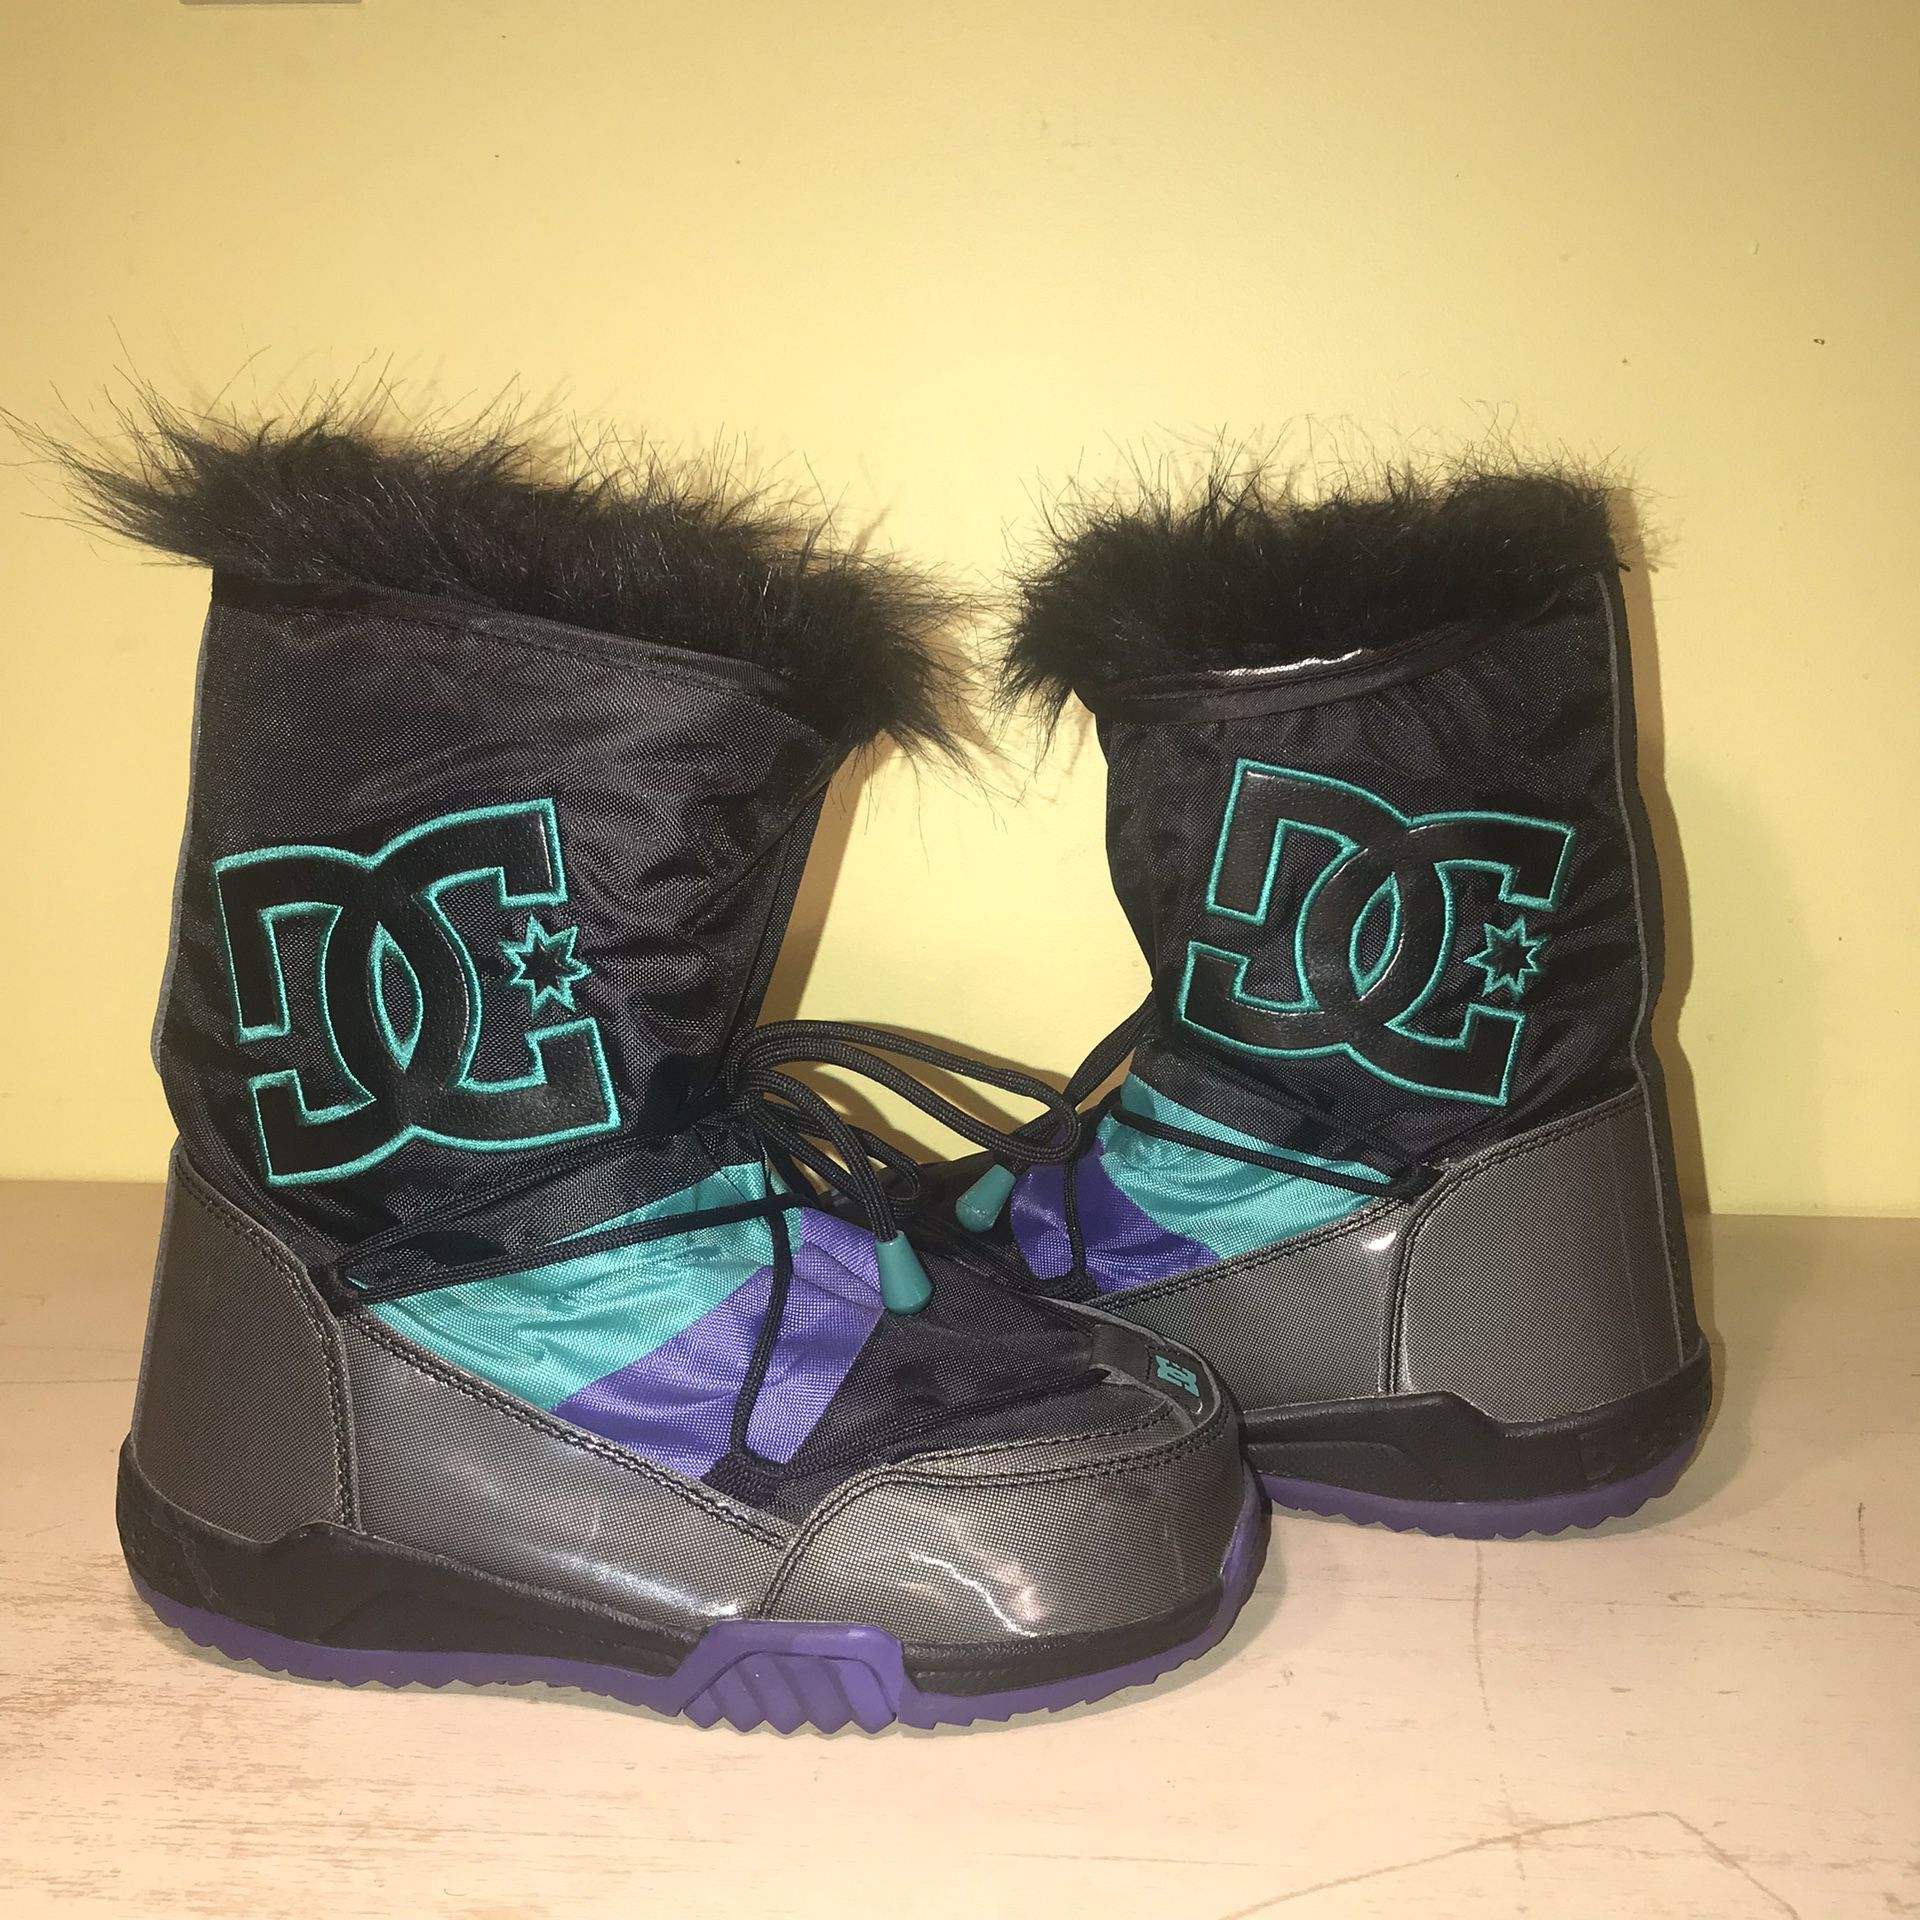 DC Shoes Womens Lodge Boot Faux Fur Pull-On Snow Boots Blk/Turquoise/Purple Sz 7